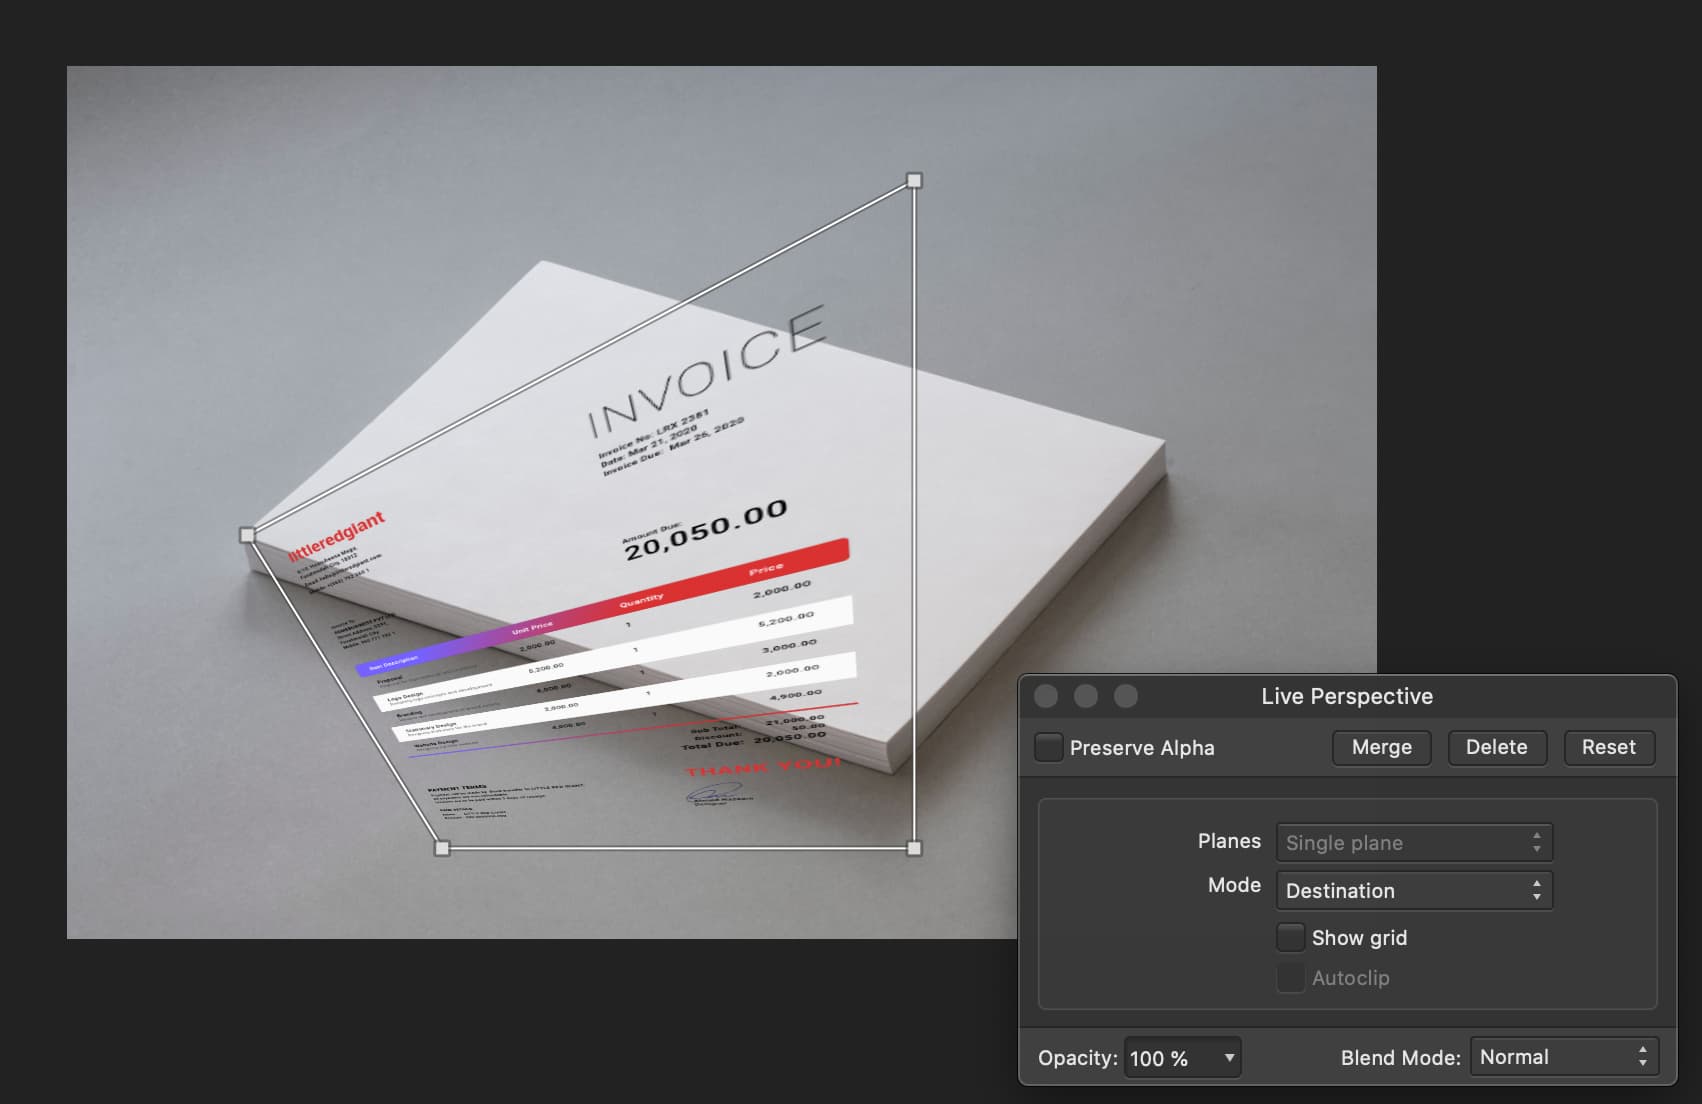 Download Create And Use Photoshop Like Smart Objects For Mockups In Affinity Photo Ahmed Naxeem Digital And Brand Identity Designer